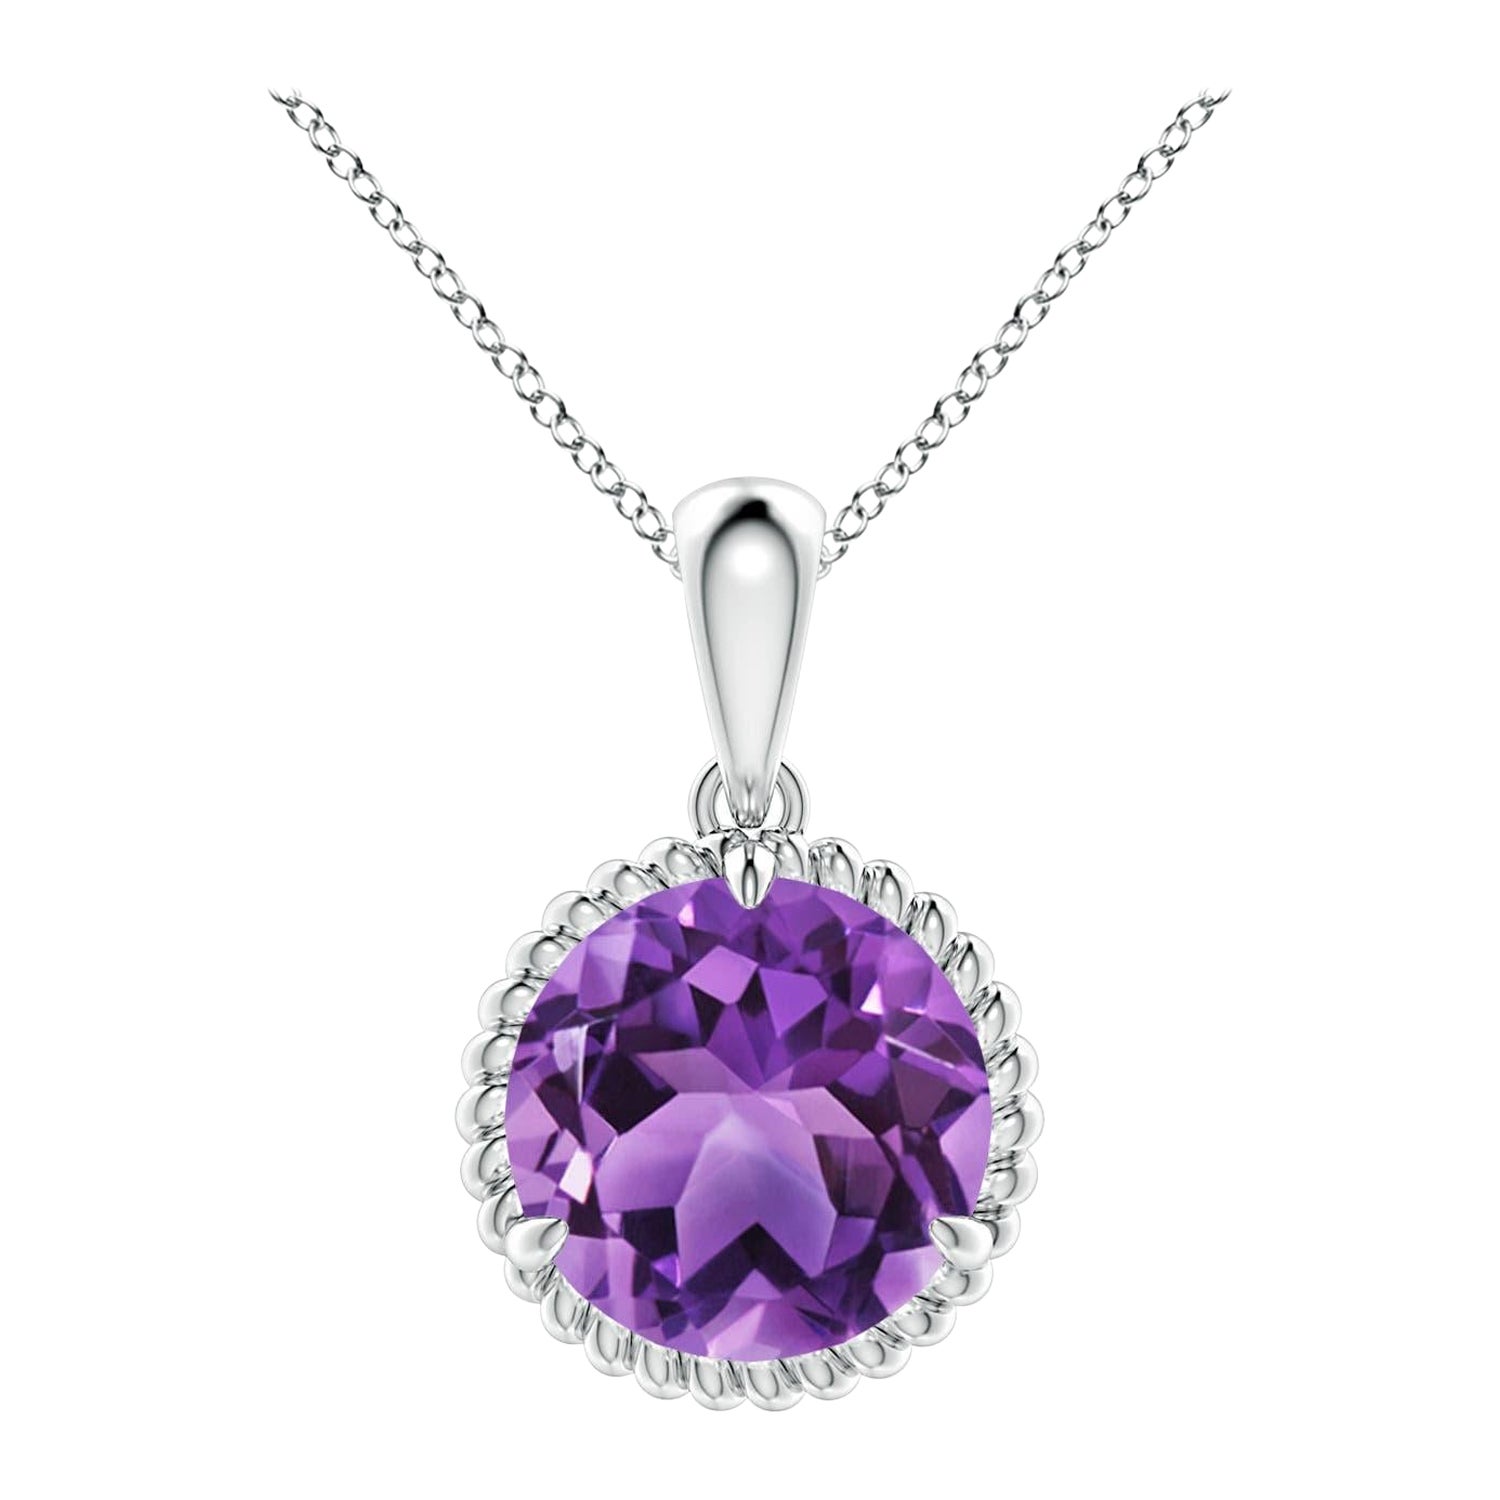 Natural Rope-Framed 2.45ct Amethyst Solitaire Pendant in 14K White Gold